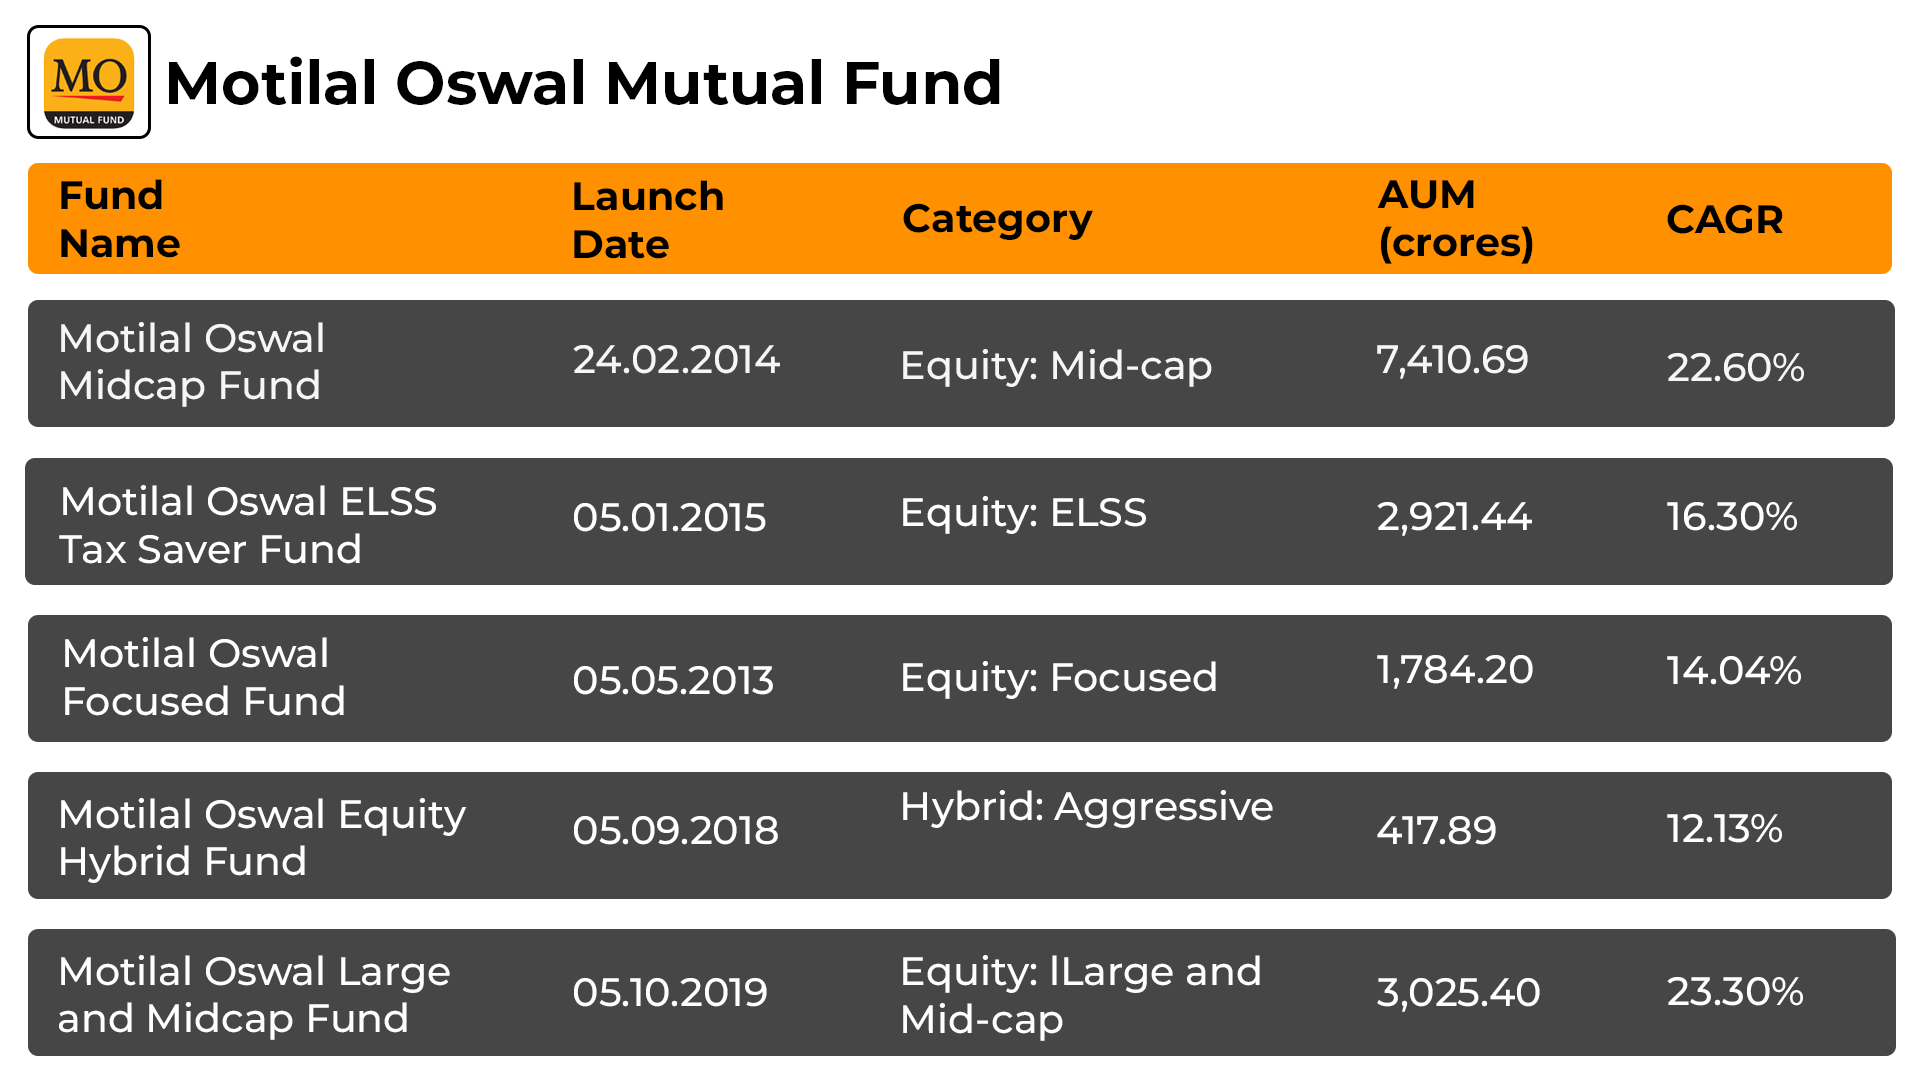 Top 5 Motilal Oswal Mutual Funds